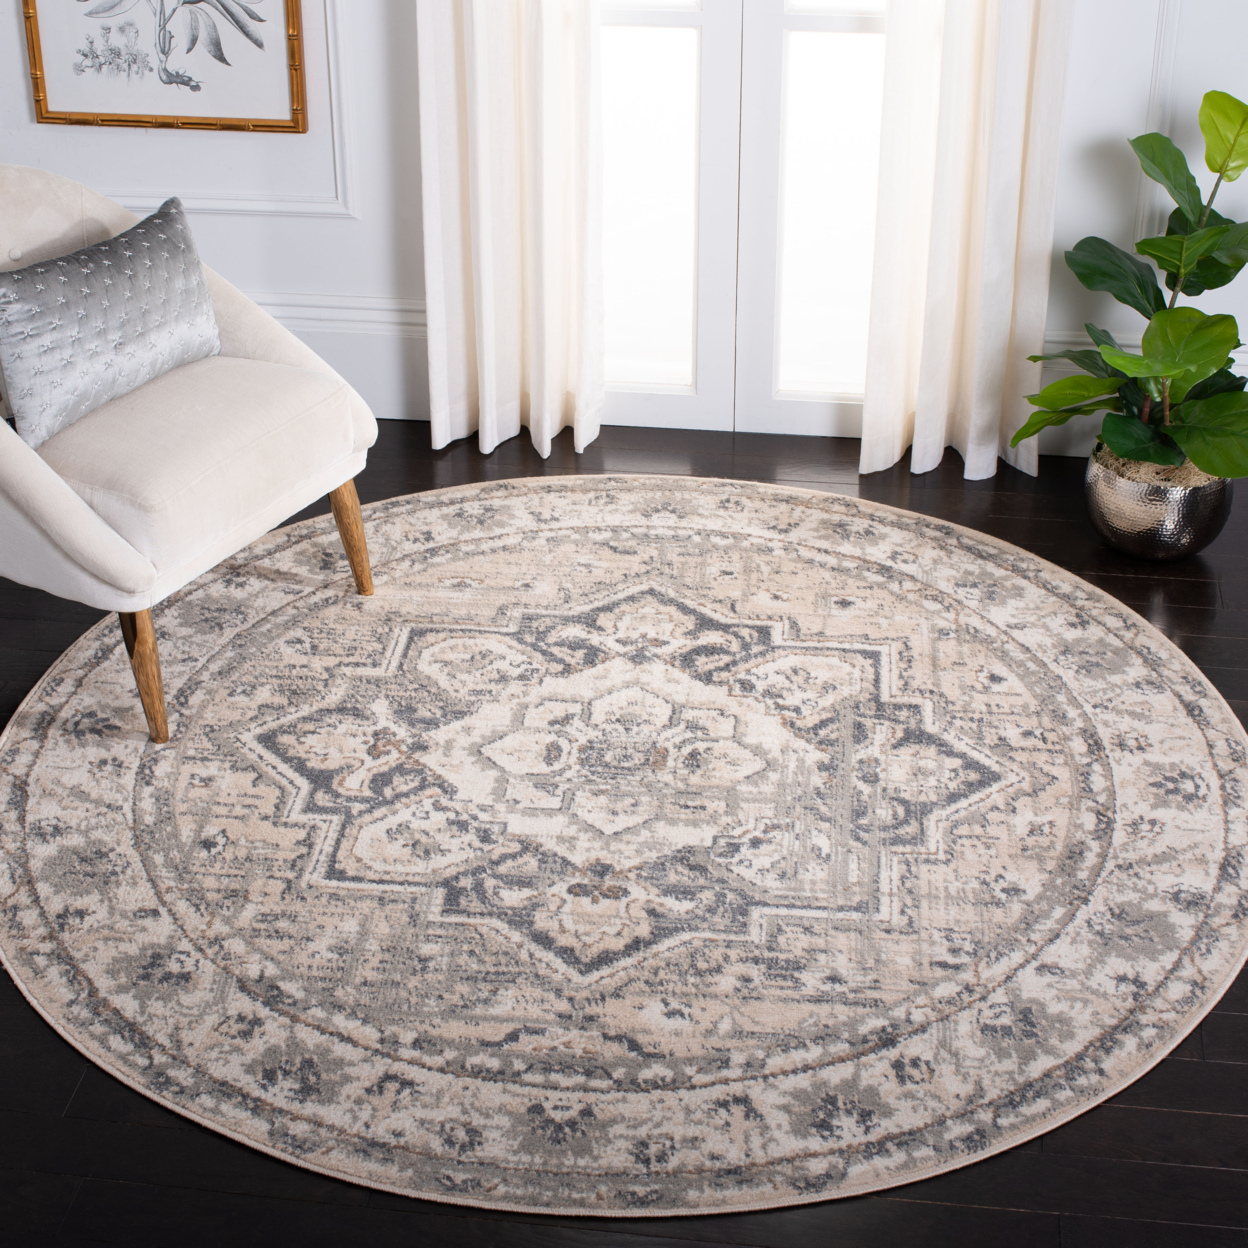 SAFAVIEH Pyramid Collection PYR268A Ivory / Grey Rug - 6-7 X 6-7 Square